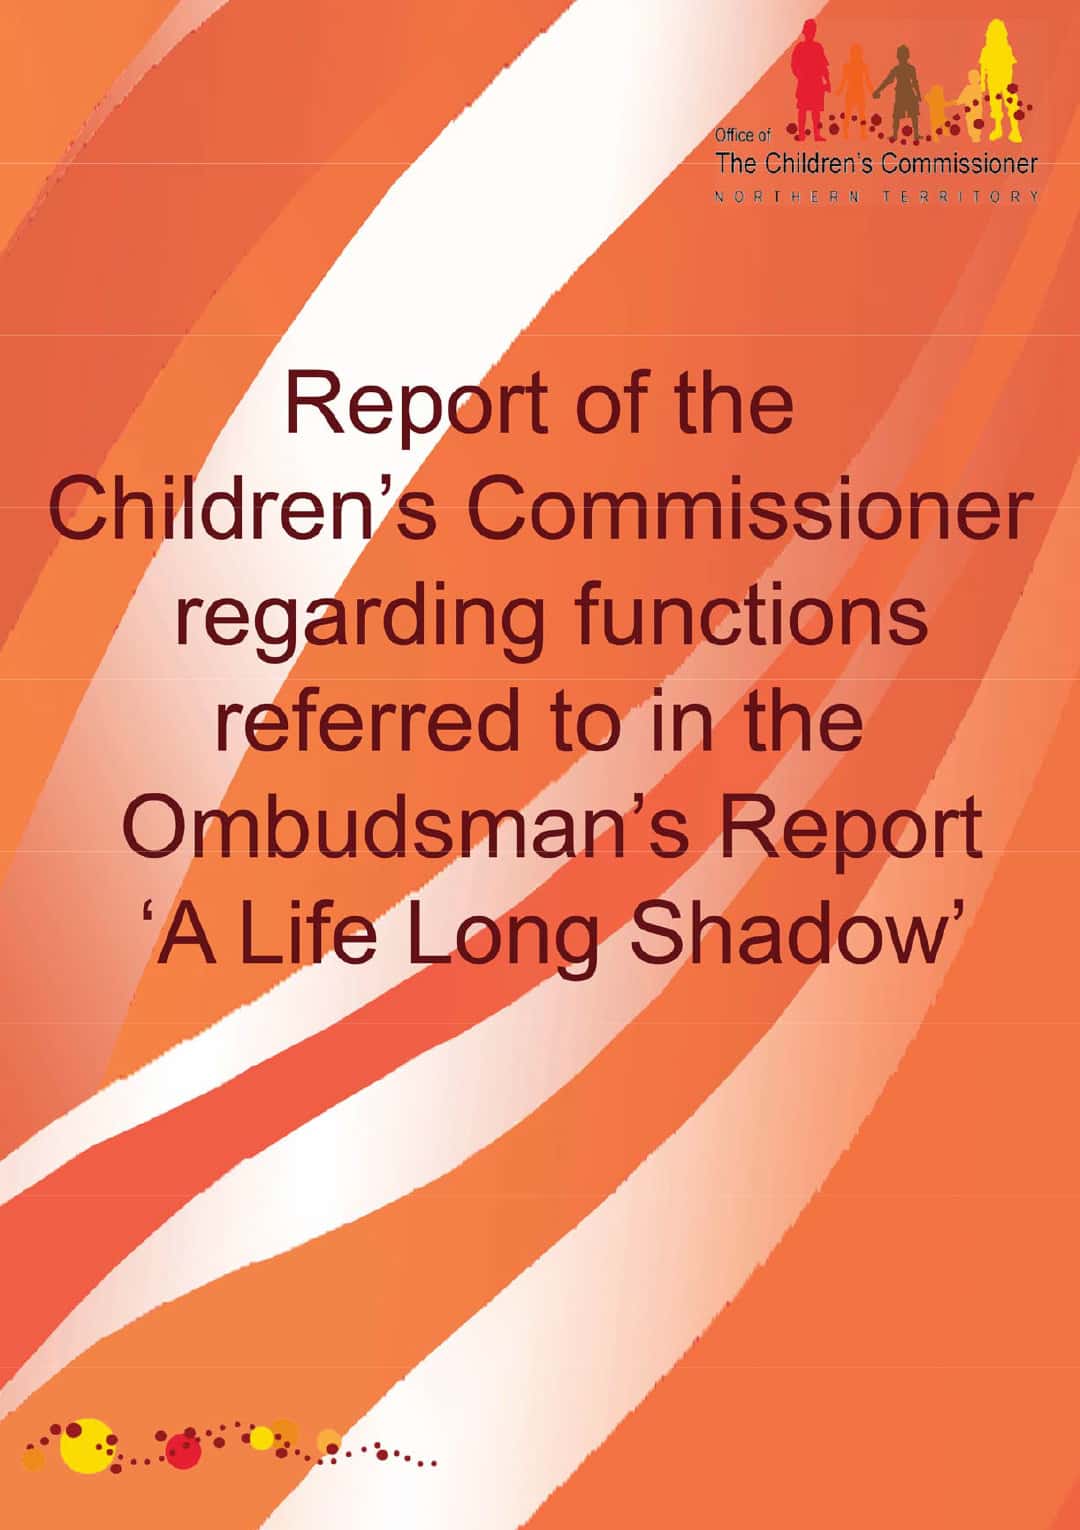 Report – Children's Commissioner regarding functions referred to in the Ombudsman's Report - 'A Life Long Shadow'